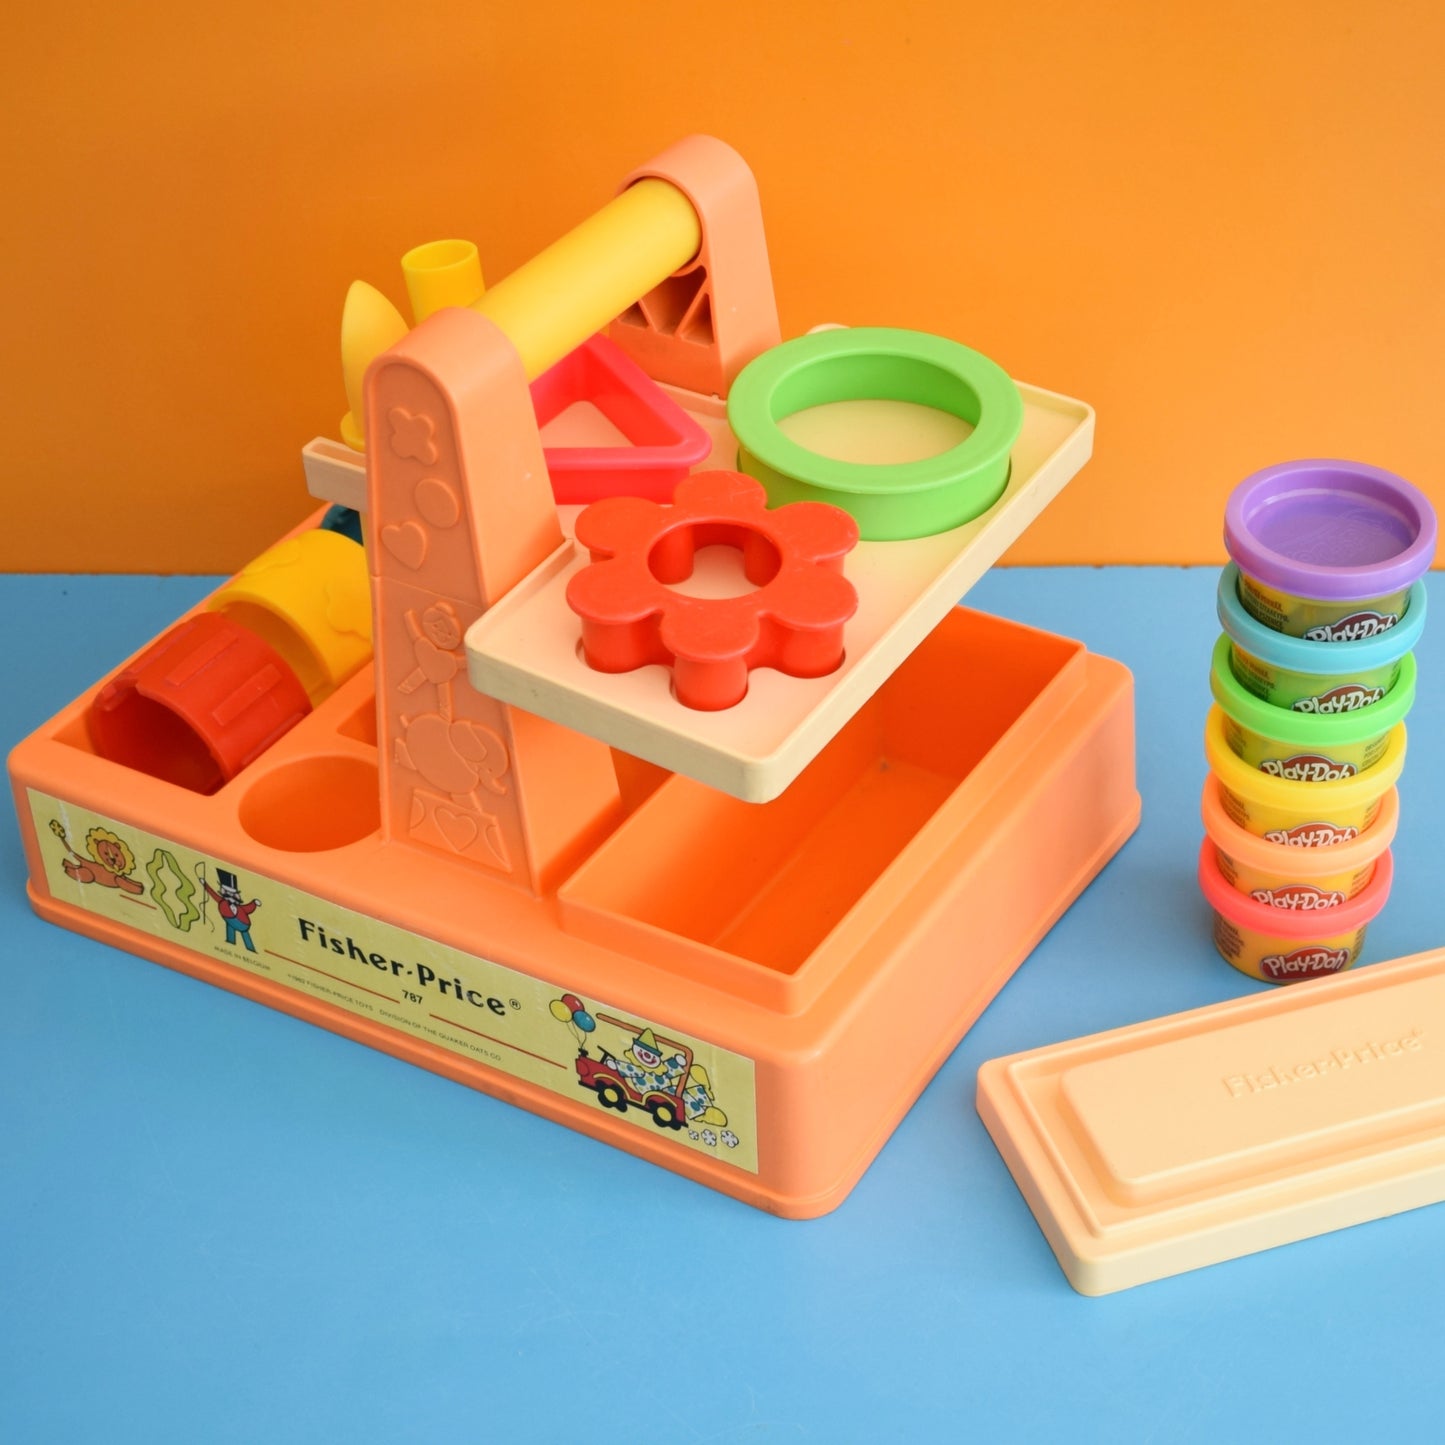 Vintage 1980s Fisher Price Play Modeling Set .